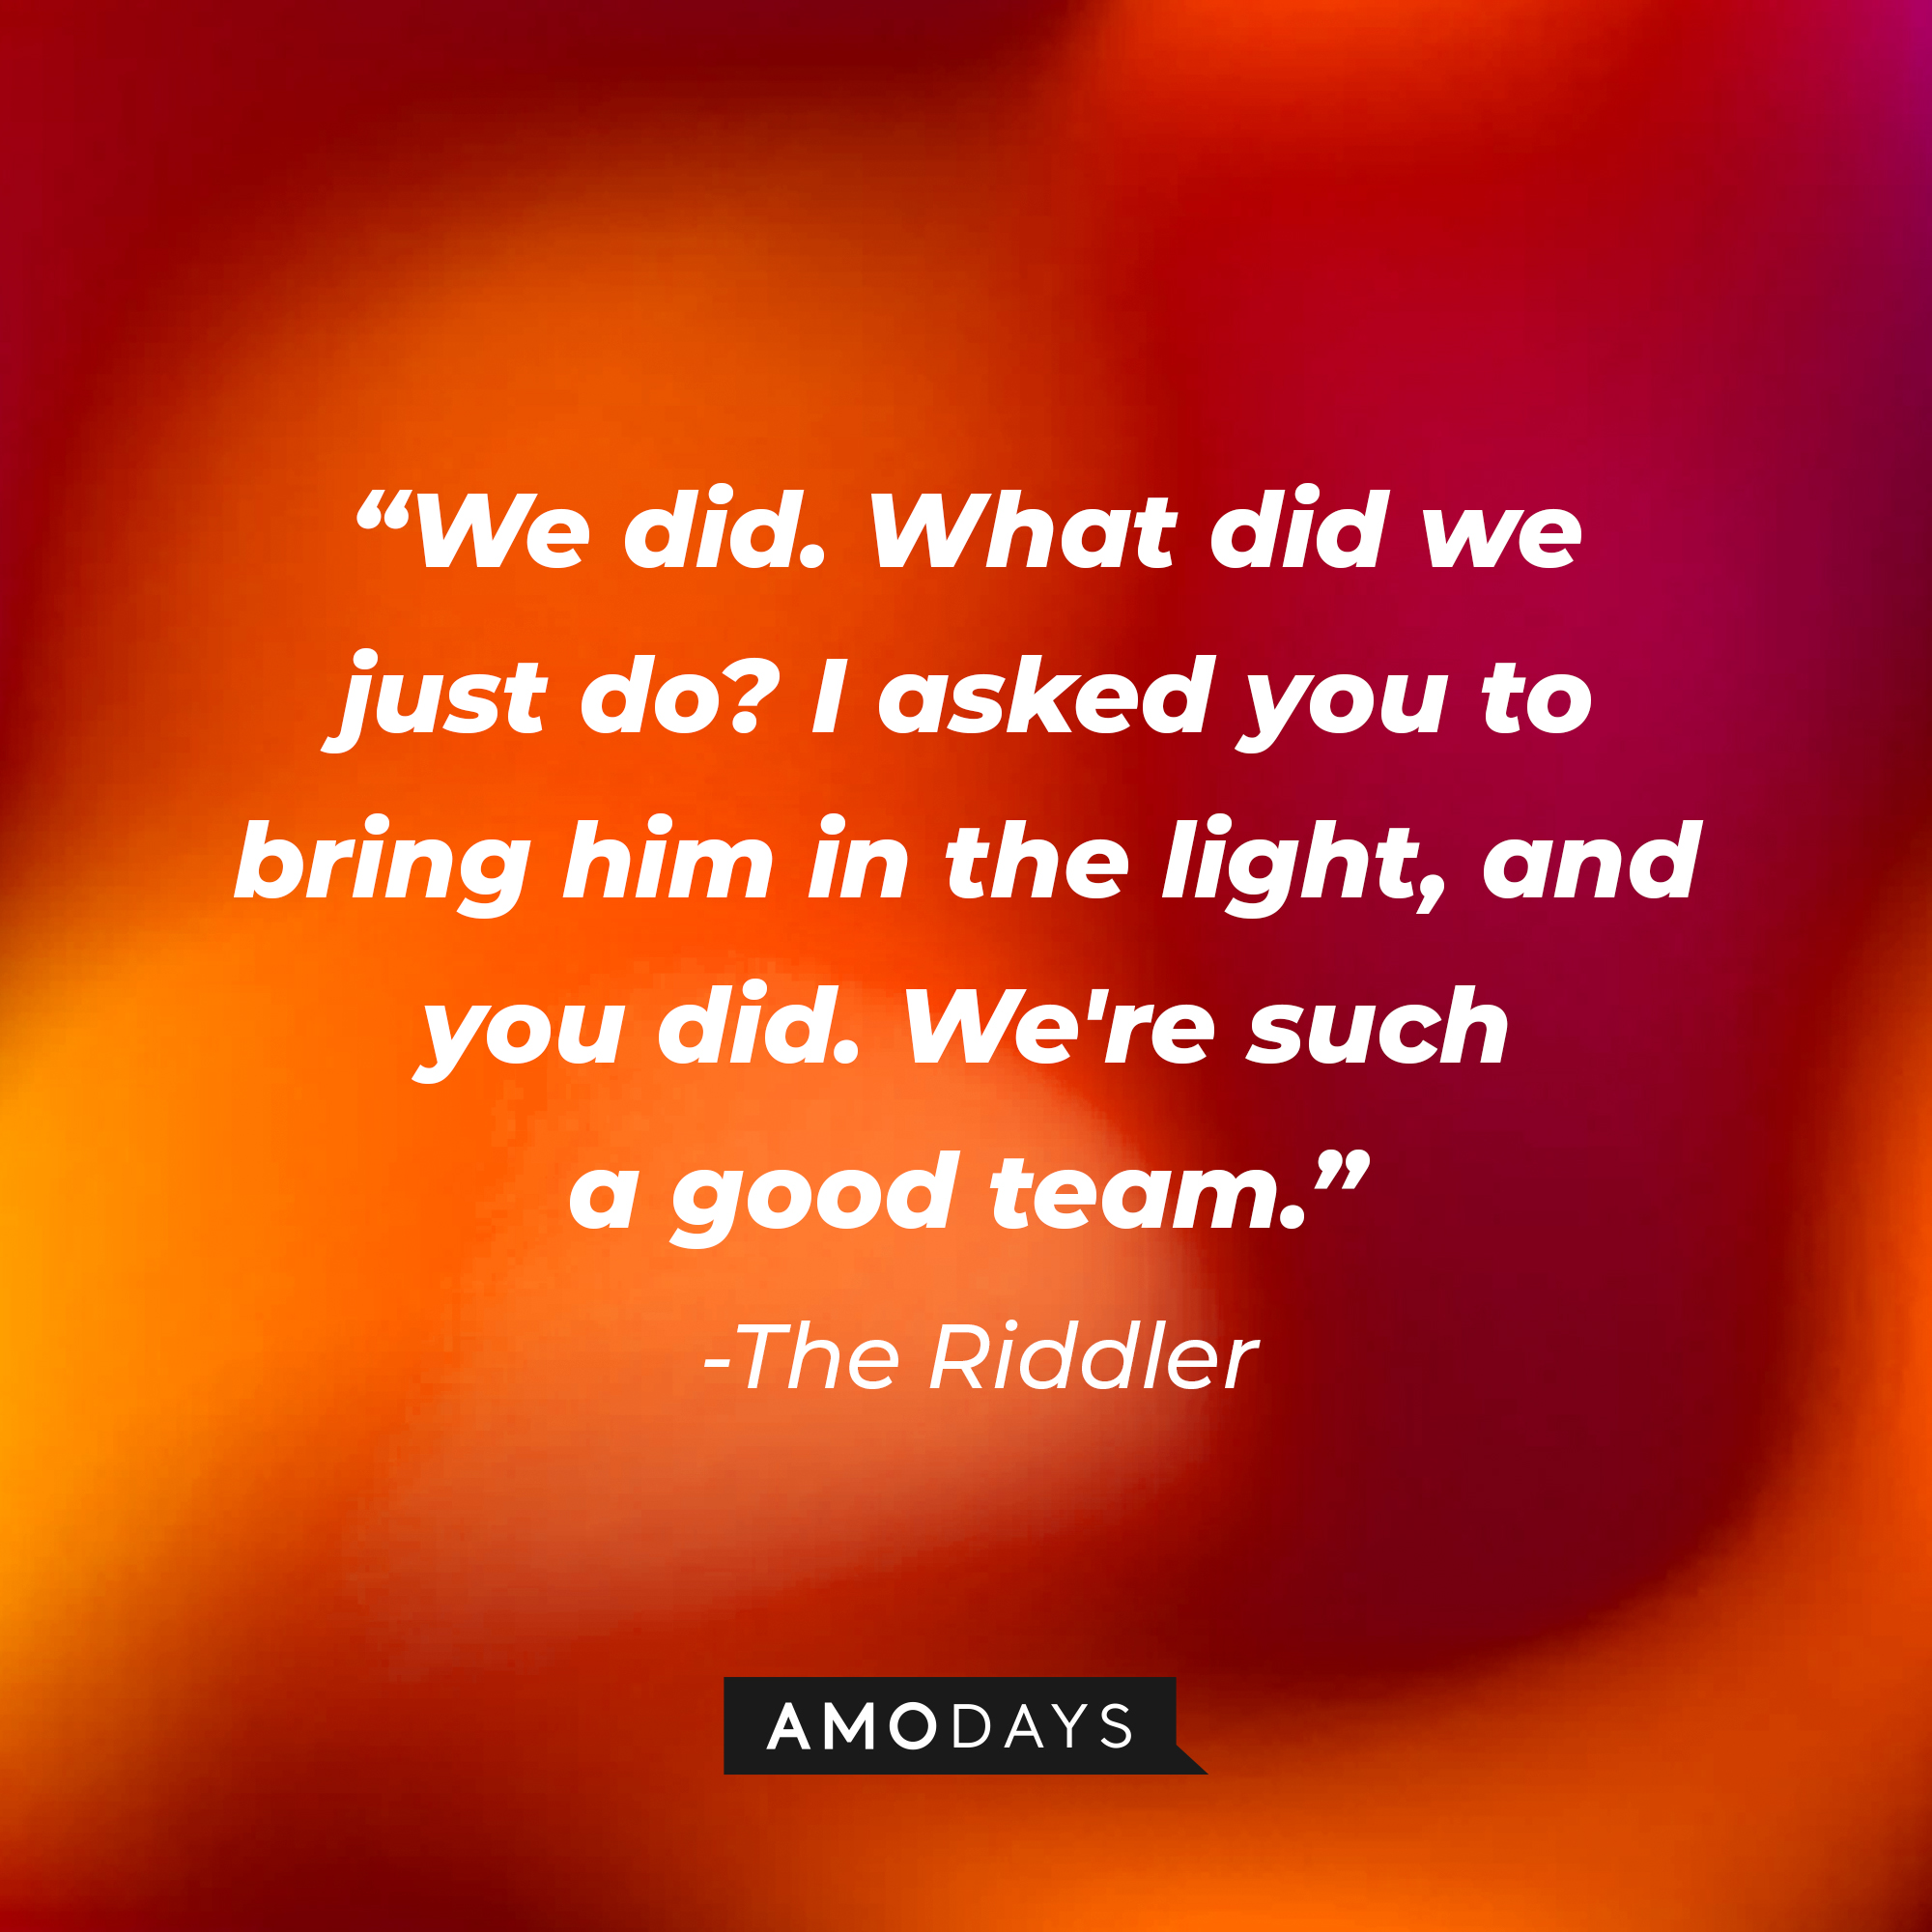 The Riddler's quote: “We did. What did we just do? I asked you to bring him in the light, and you did. We're such a good team.” | Source: Amodays